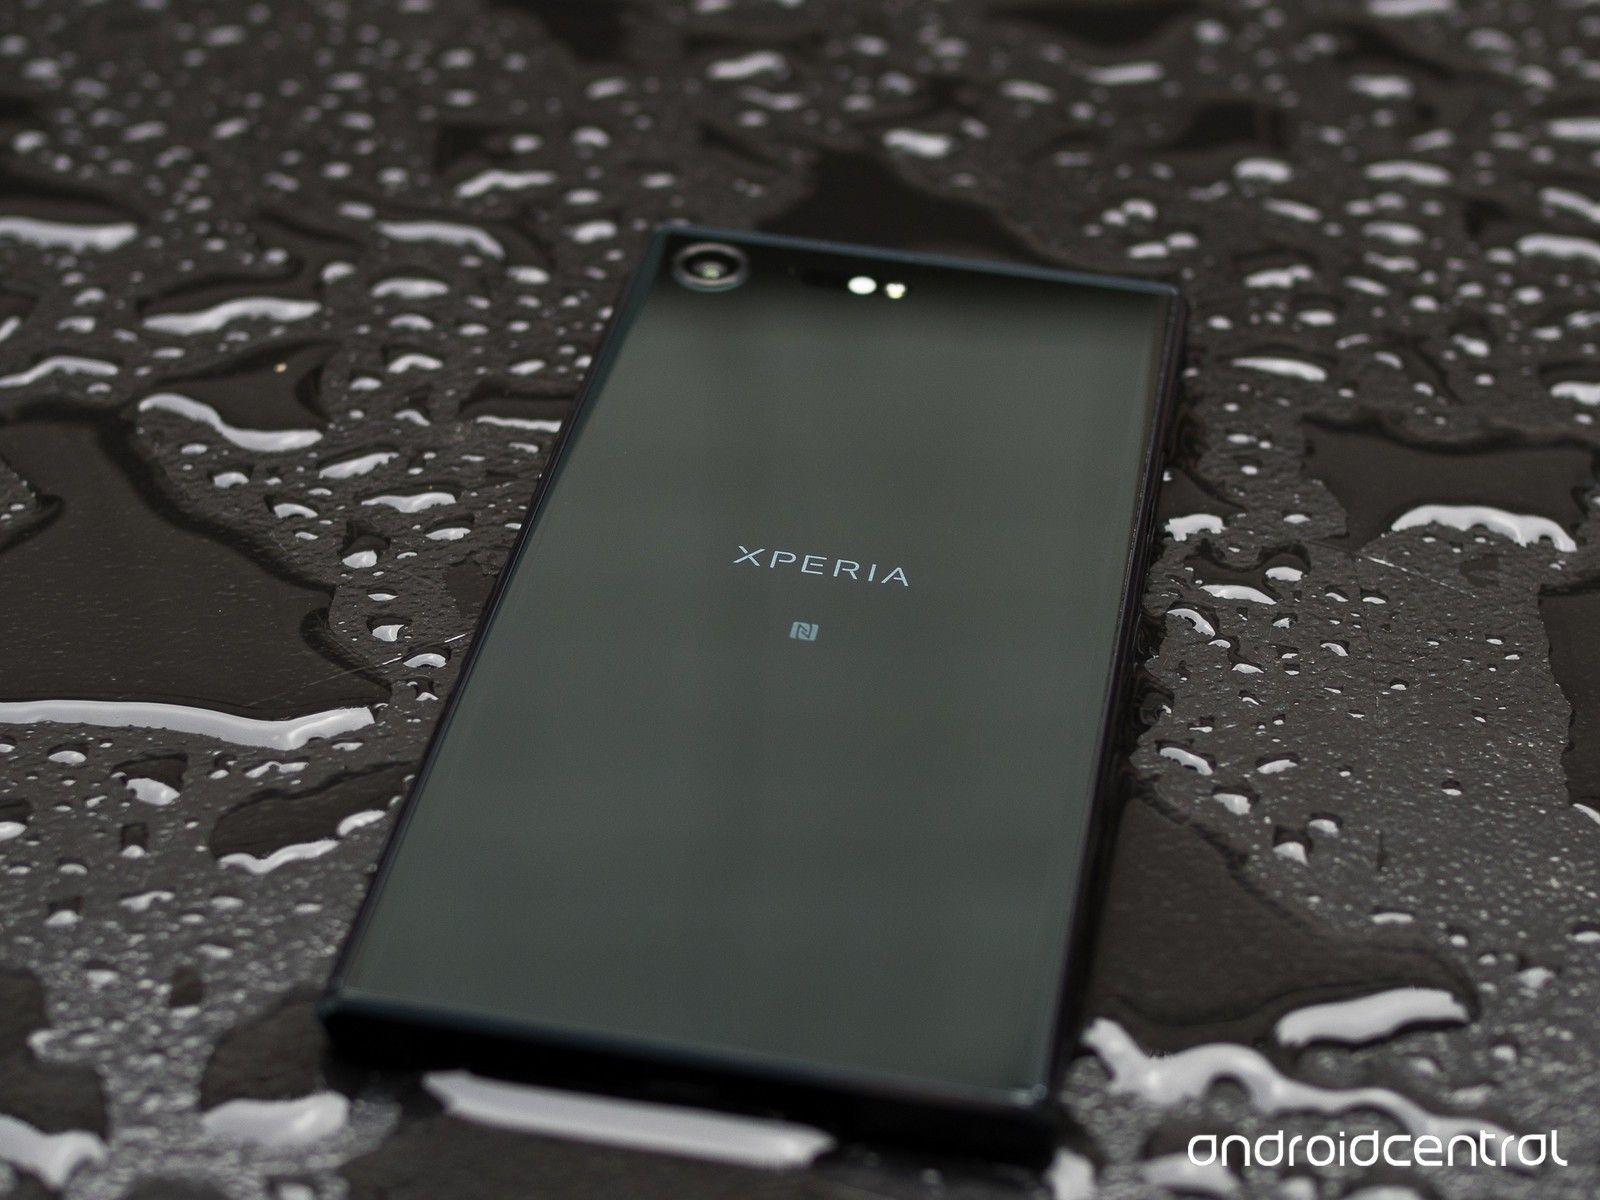 Sony Xperia XZ Premium review: $799 of lust. and disappointment